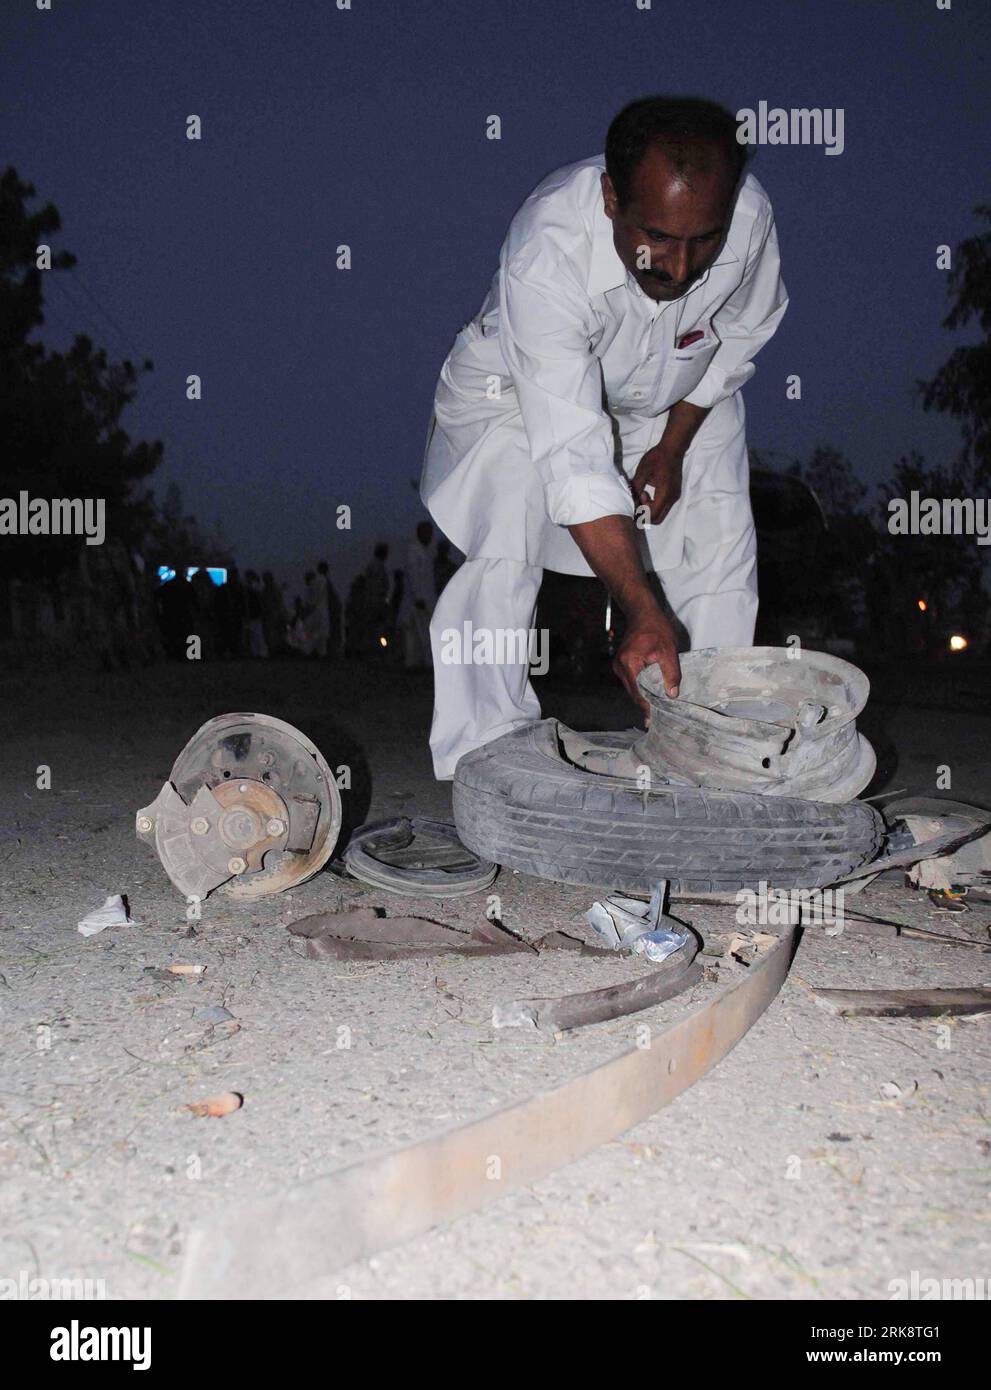 Bildnummer: 54073890  Datum: 24.05.2010  Copyright: imago/Xinhua A man checks the debris of a vehicle damaged in a blast in southwestern Pakistani city of Quetta on May 24, 2010. At least two were killed and nine others were injured in an explosion that took place on the airport road in Quetta on late Monday night. (Xinhua/Iqbal Hussain) (zl) (4)PAKISTAN-QUETTA-BLAST PUBLICATIONxNOTxINxCHN premiumd xint Gesellschaft Unglück Explosion kbdig xdp 2010 hoch    Bildnummer 54073890 Date 24 05 2010 Copyright Imago XINHUA a Man Checks The debris of a Vehicle damaged in a Blast in South Western Pakista Stock Photo